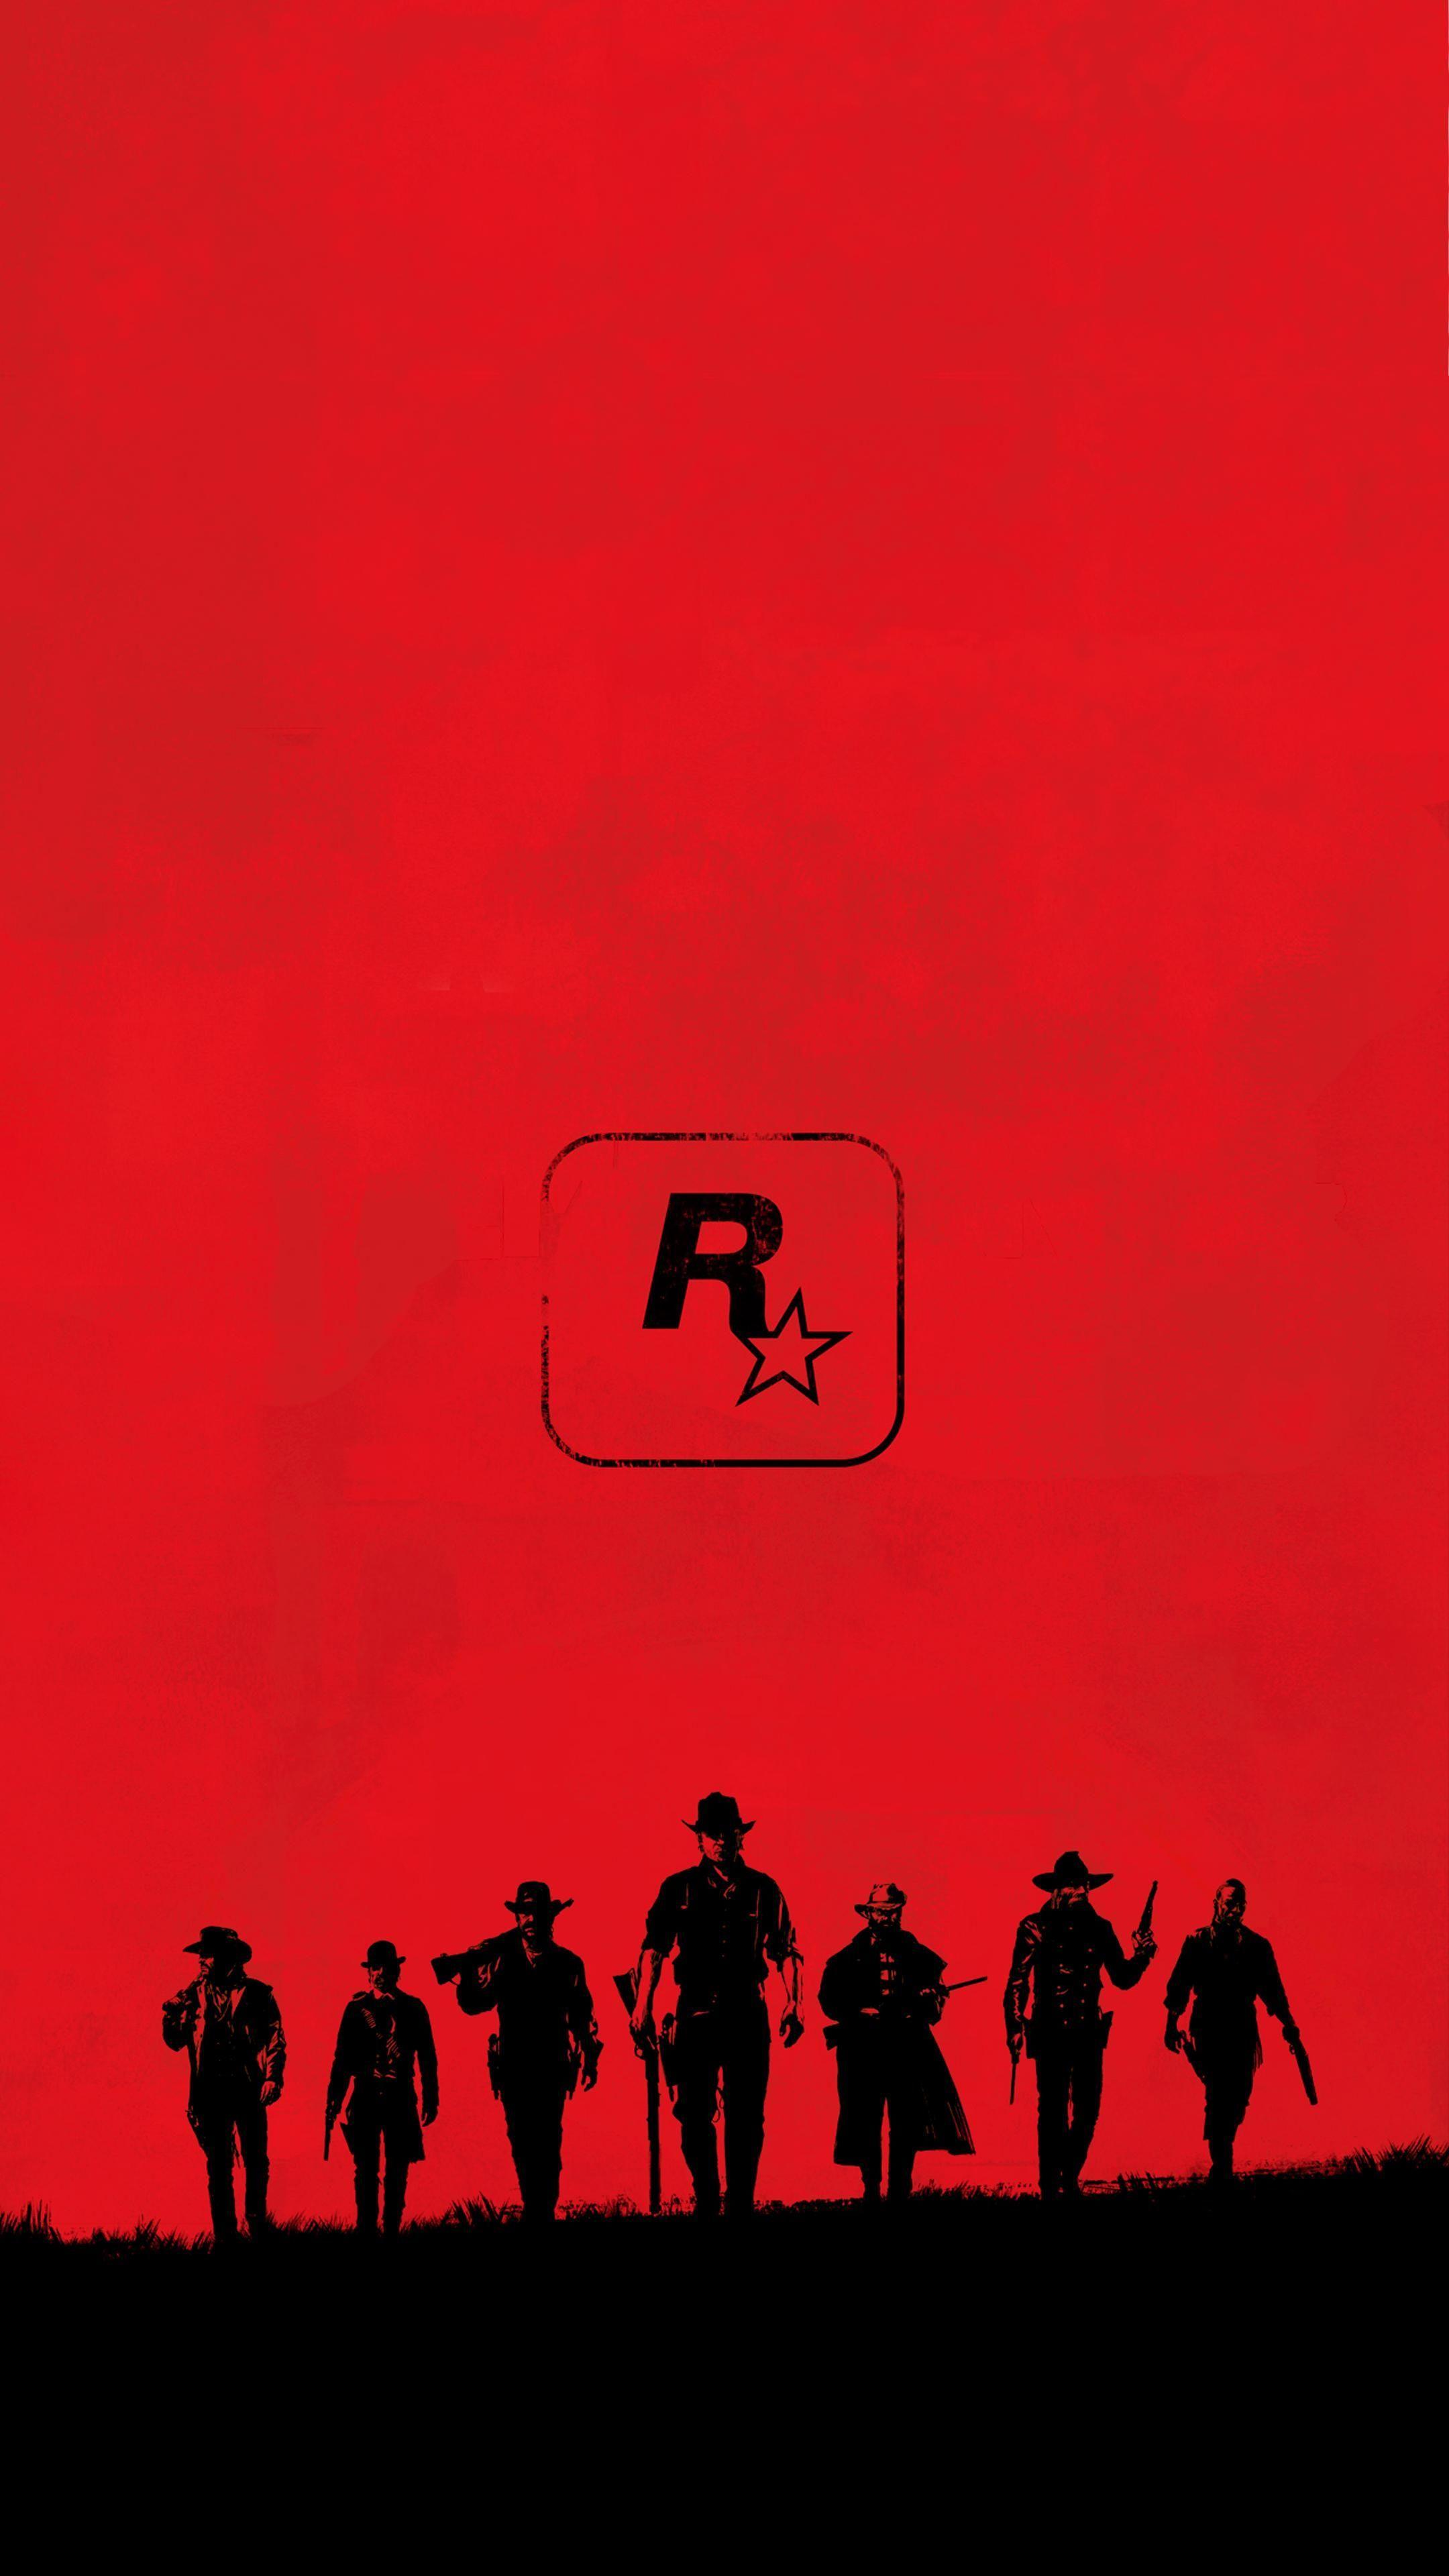 RDR2 cell phone wallpaper. LatestGames. Red dead redemption